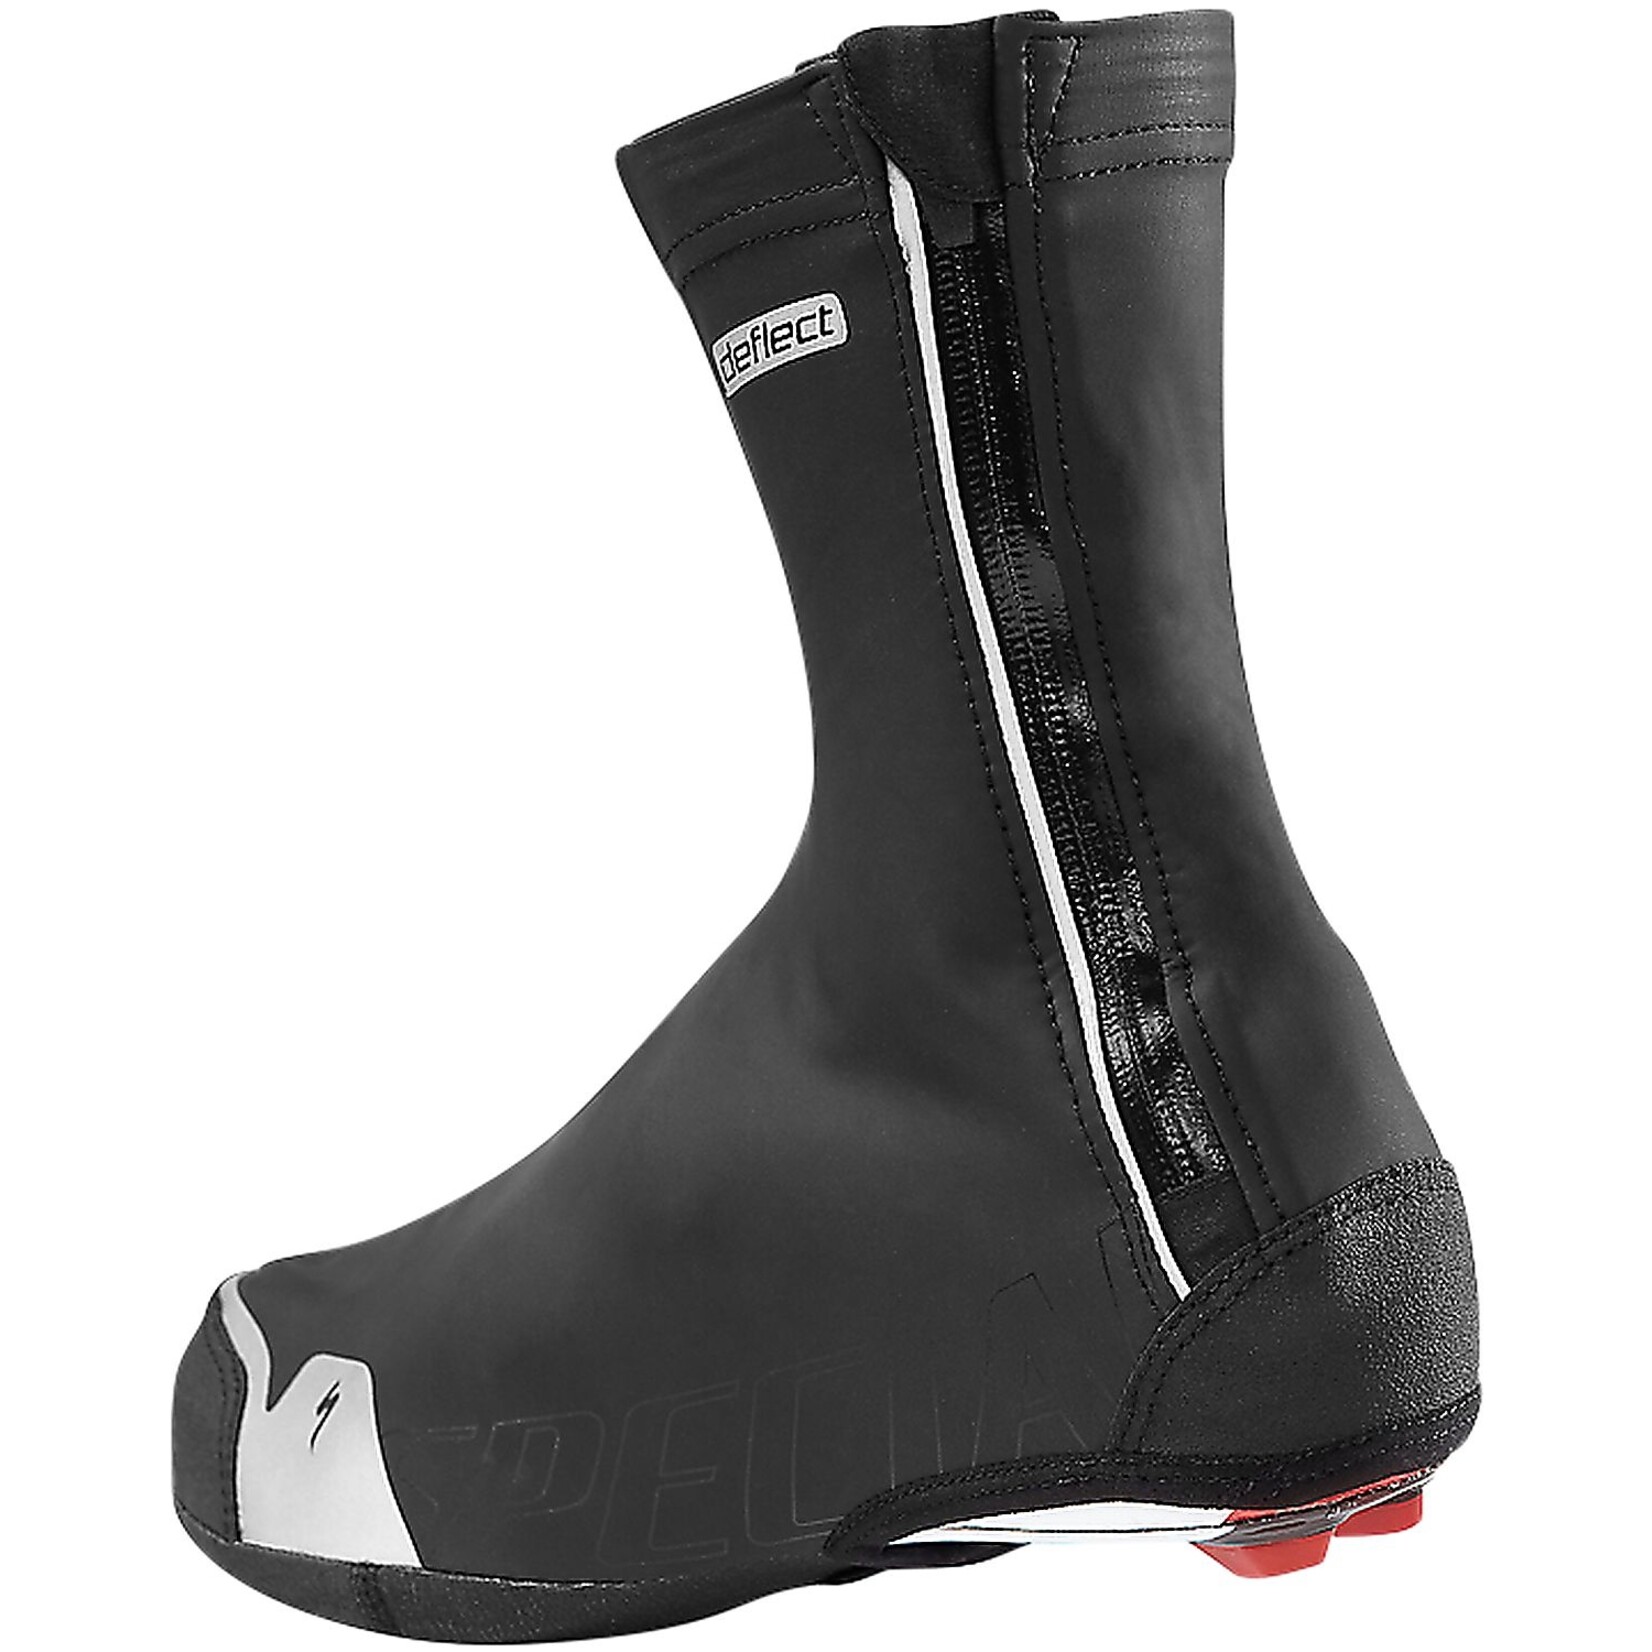 Specialized Deflect Comp Shoe Covers in Black